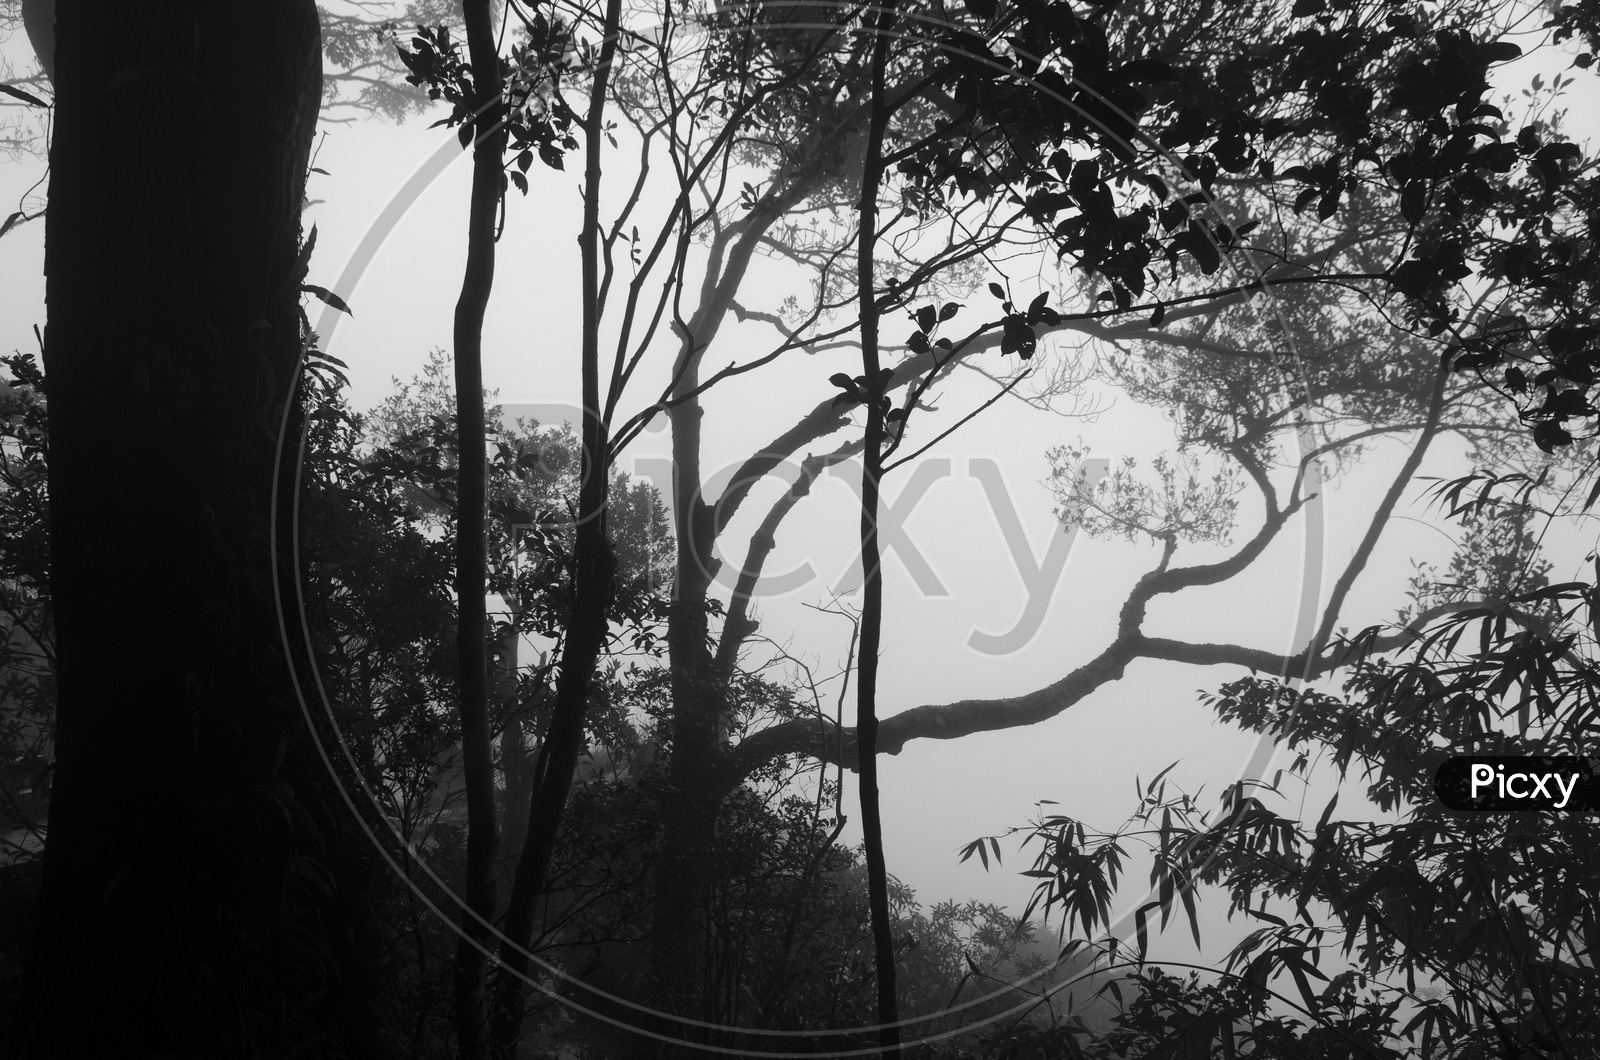 Fog Over Trees In Tropical Forest at Khao Yai National Park, Thailand